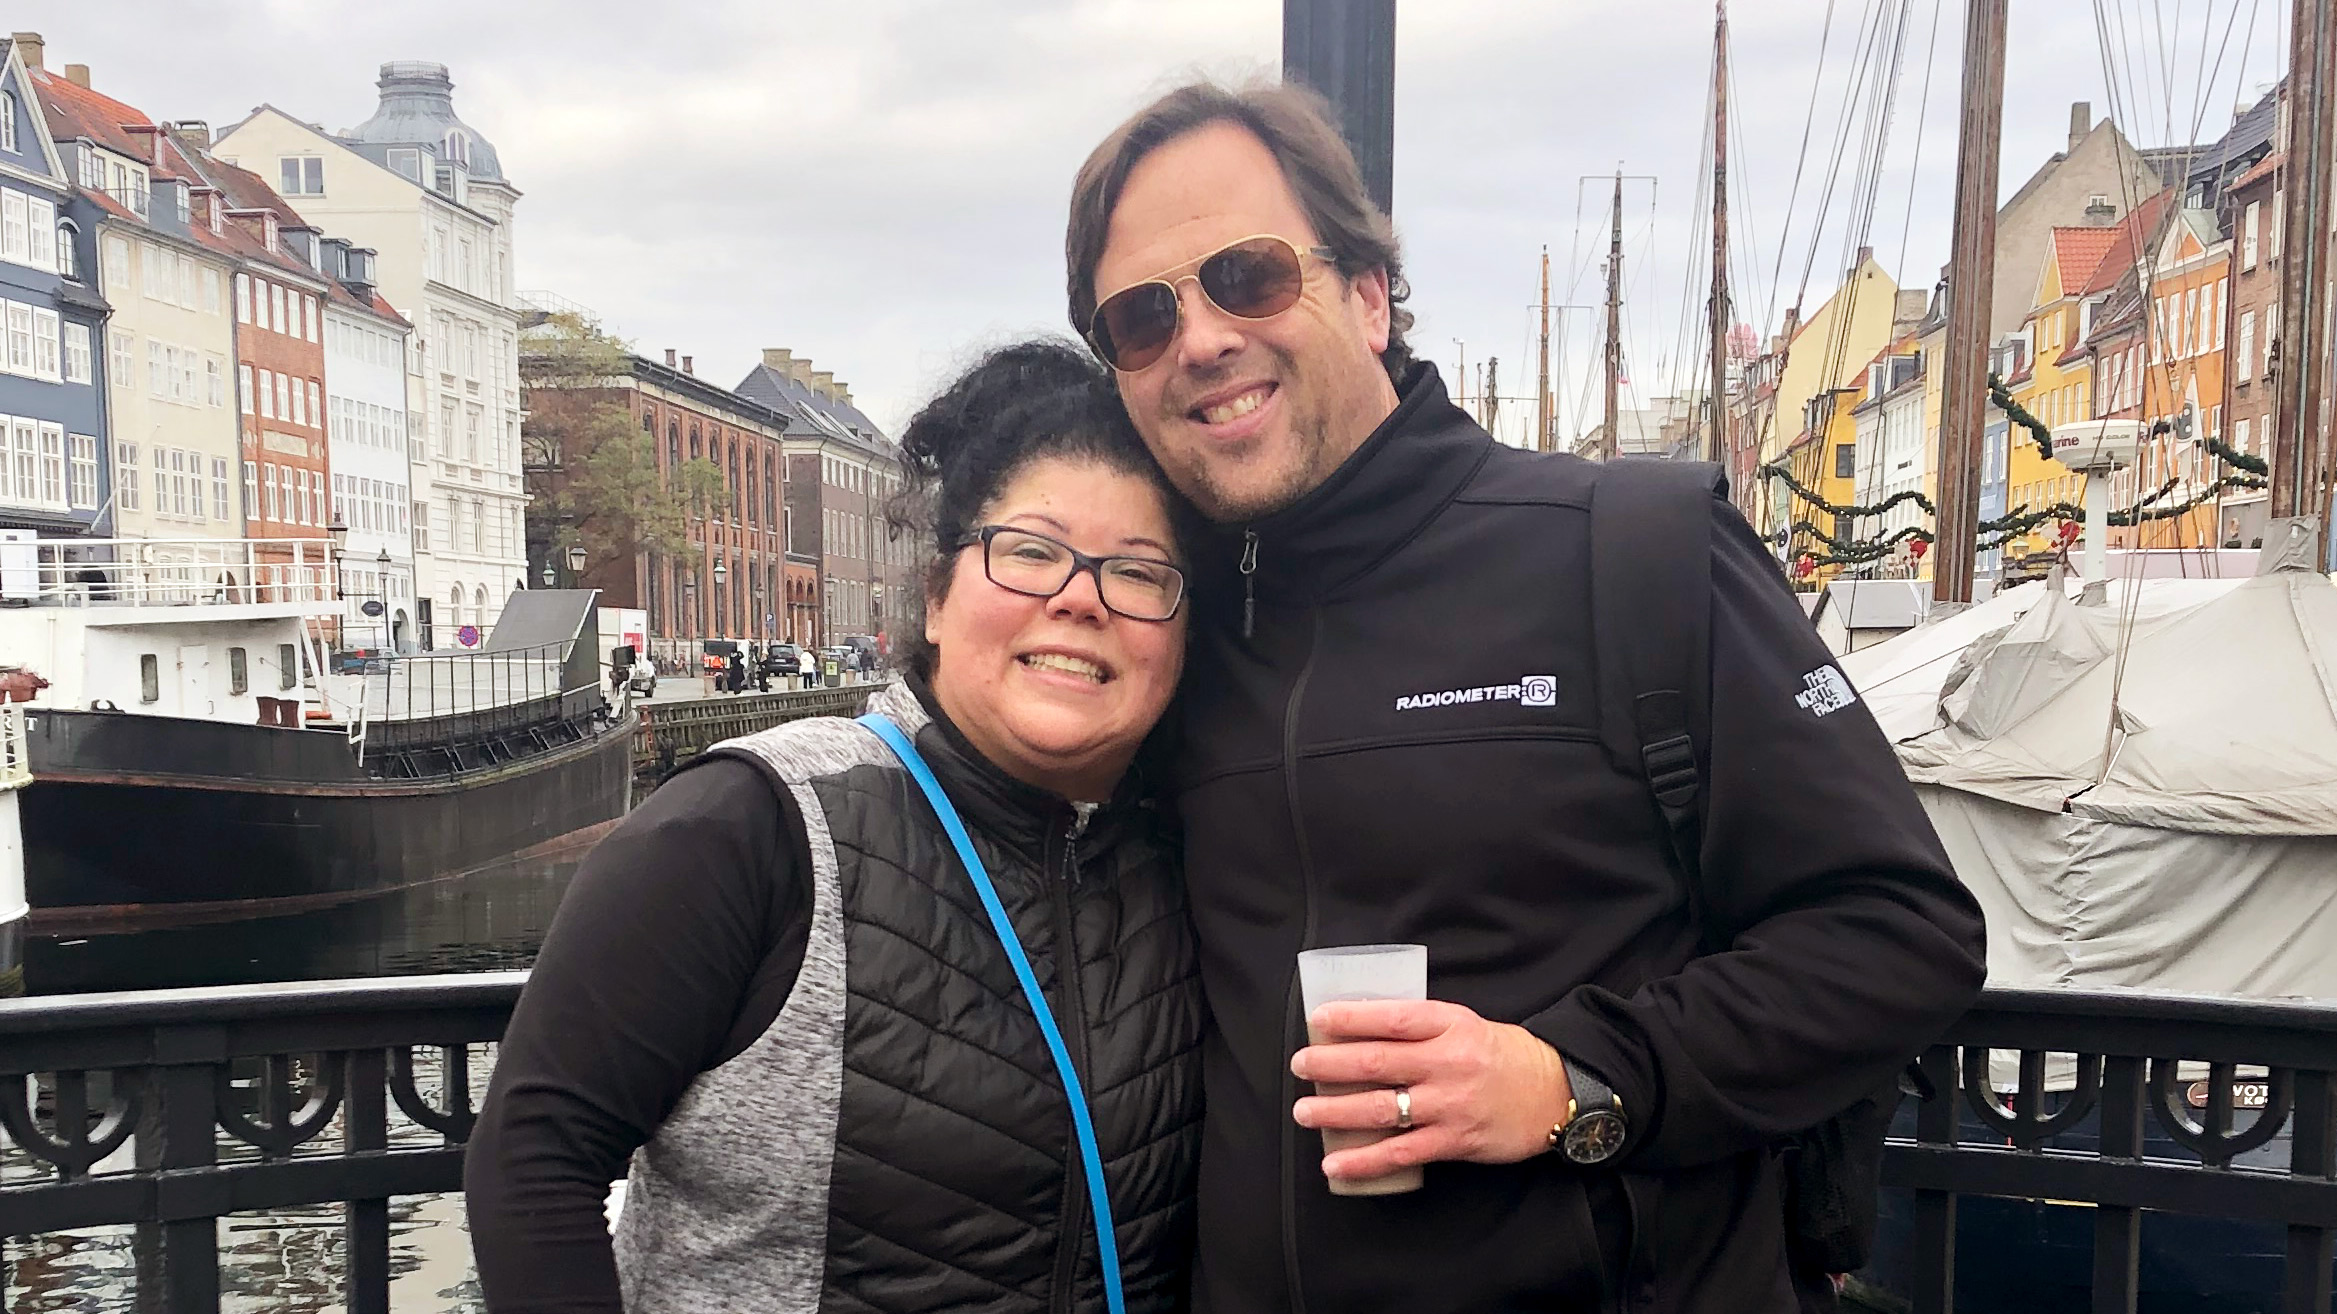 Dawn Peta and her husband Mike take a moment to enjoy some Copenhagen sightseeing during a trip to Denmark. Peta is a clinical nurse educator for South Zone.